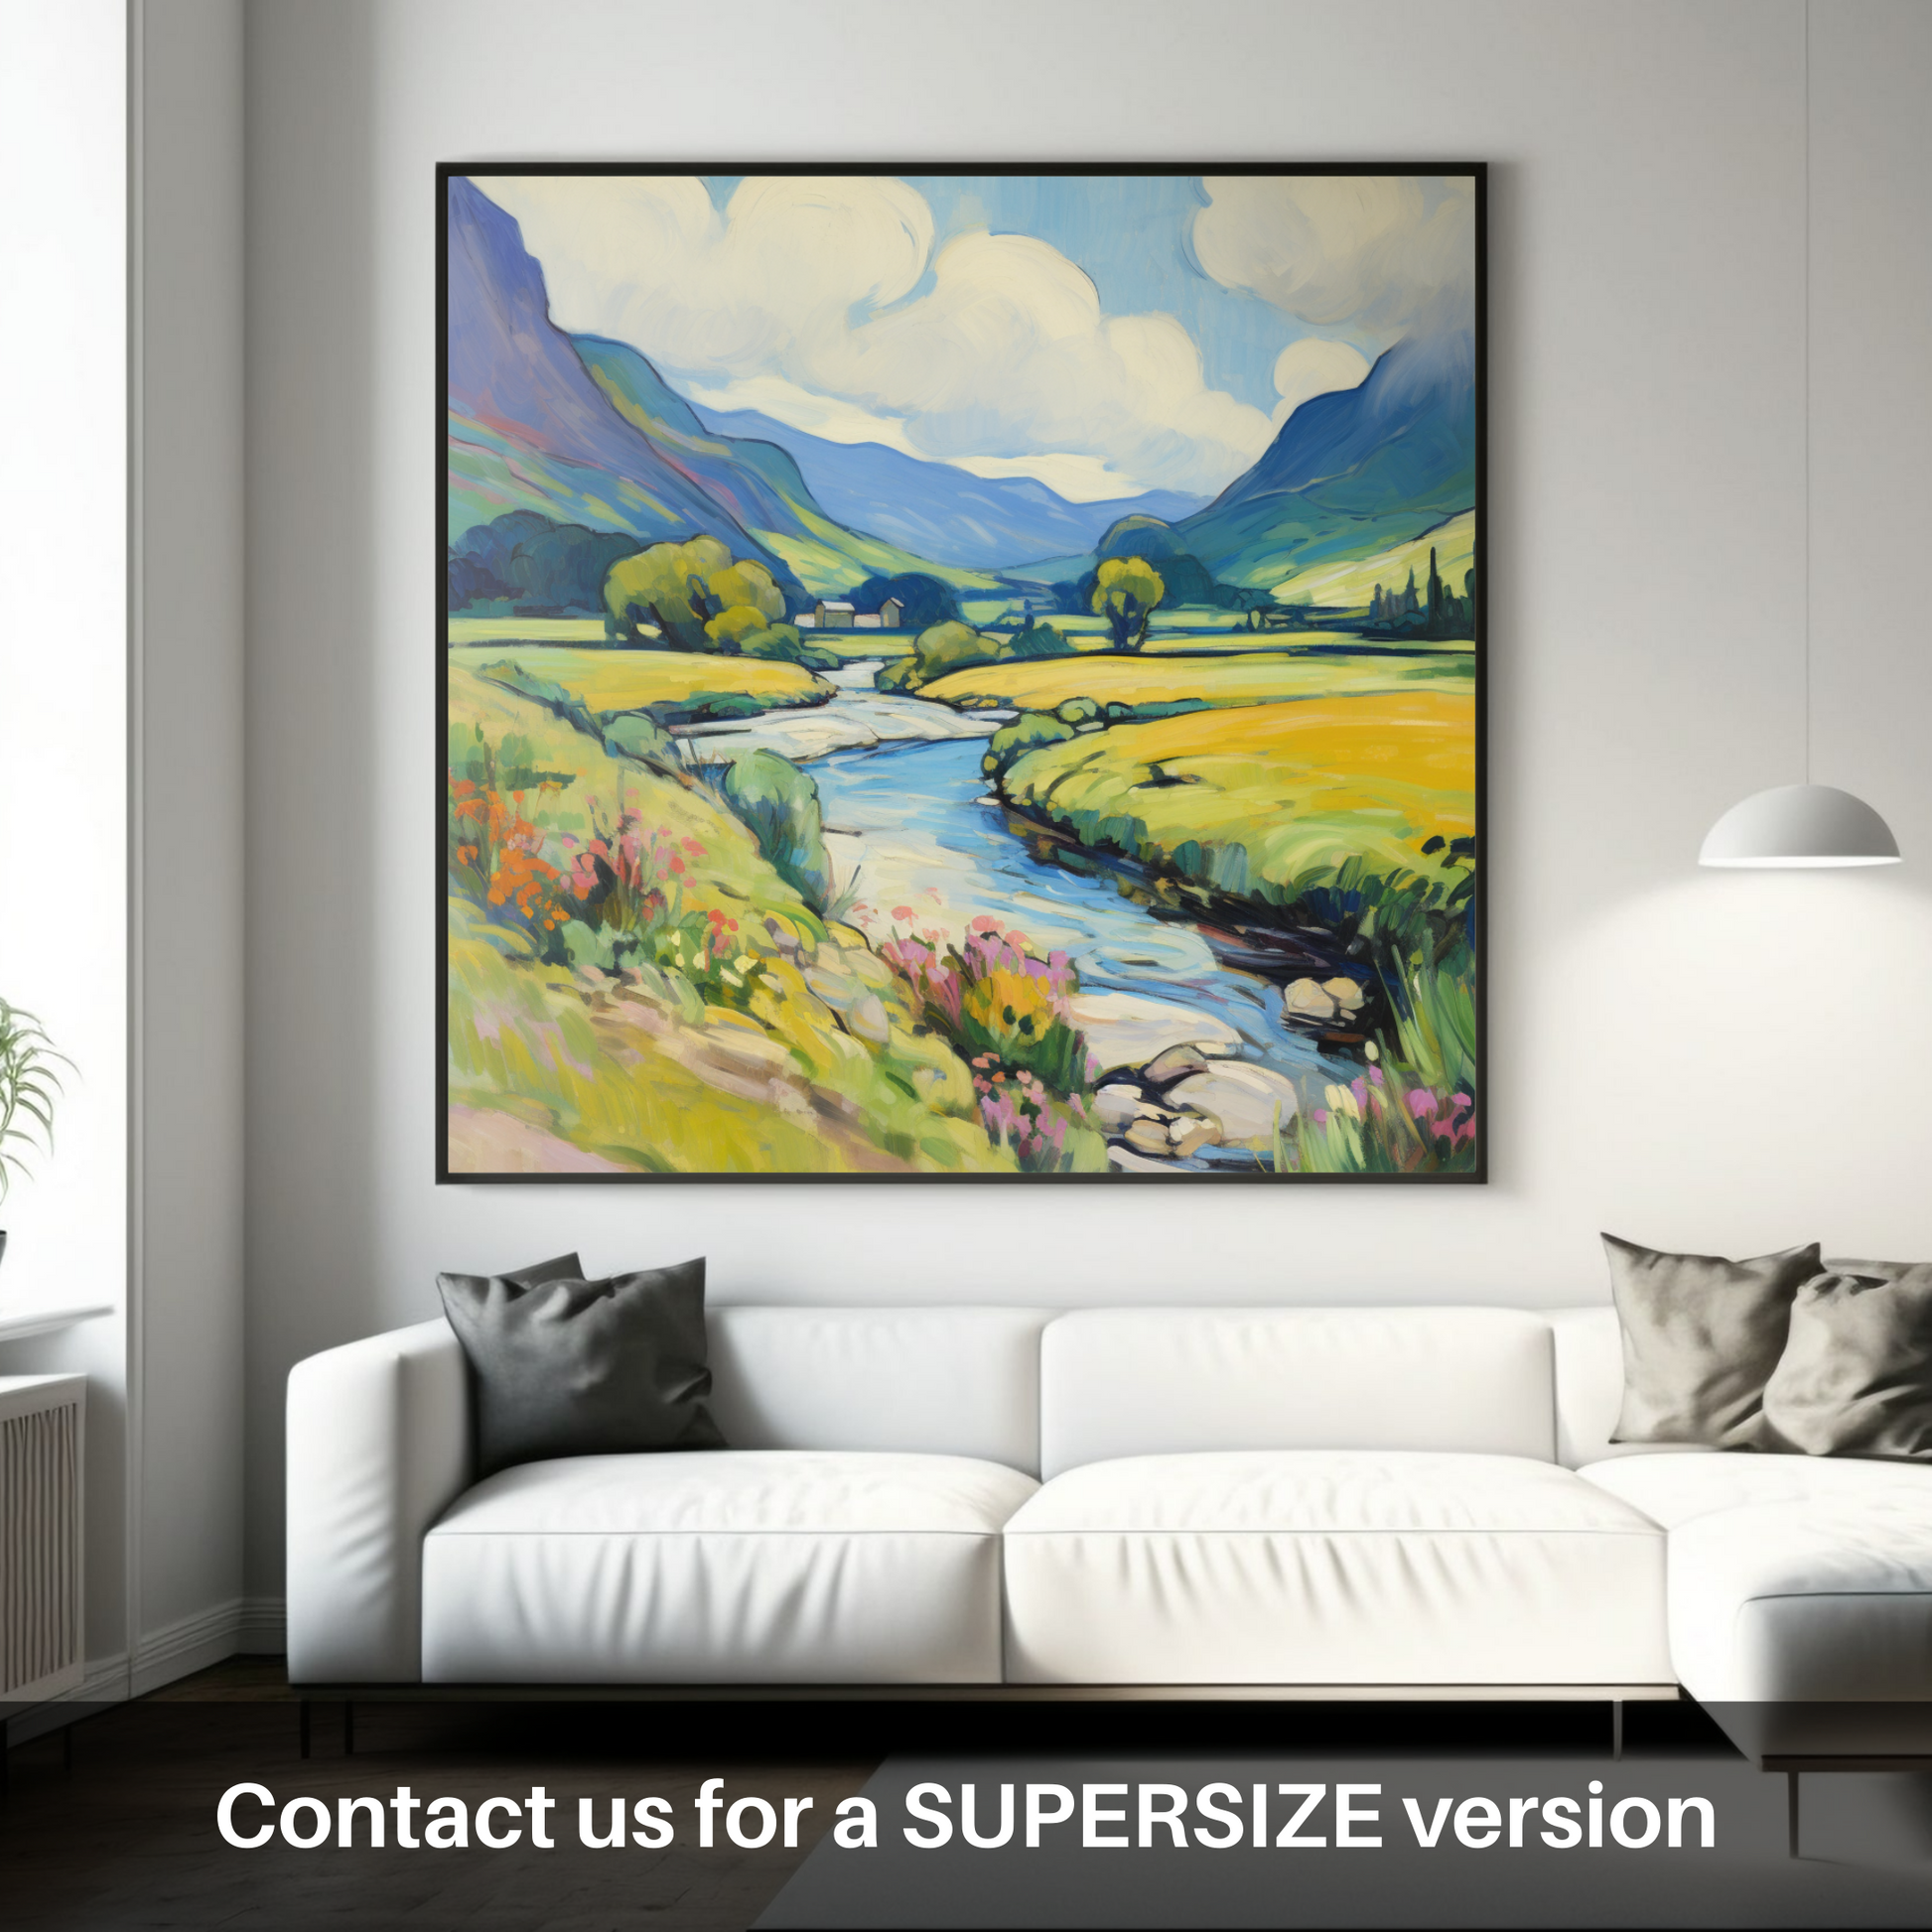 Huge supersize print of Glen Falloch, Argyll and Bute in summer